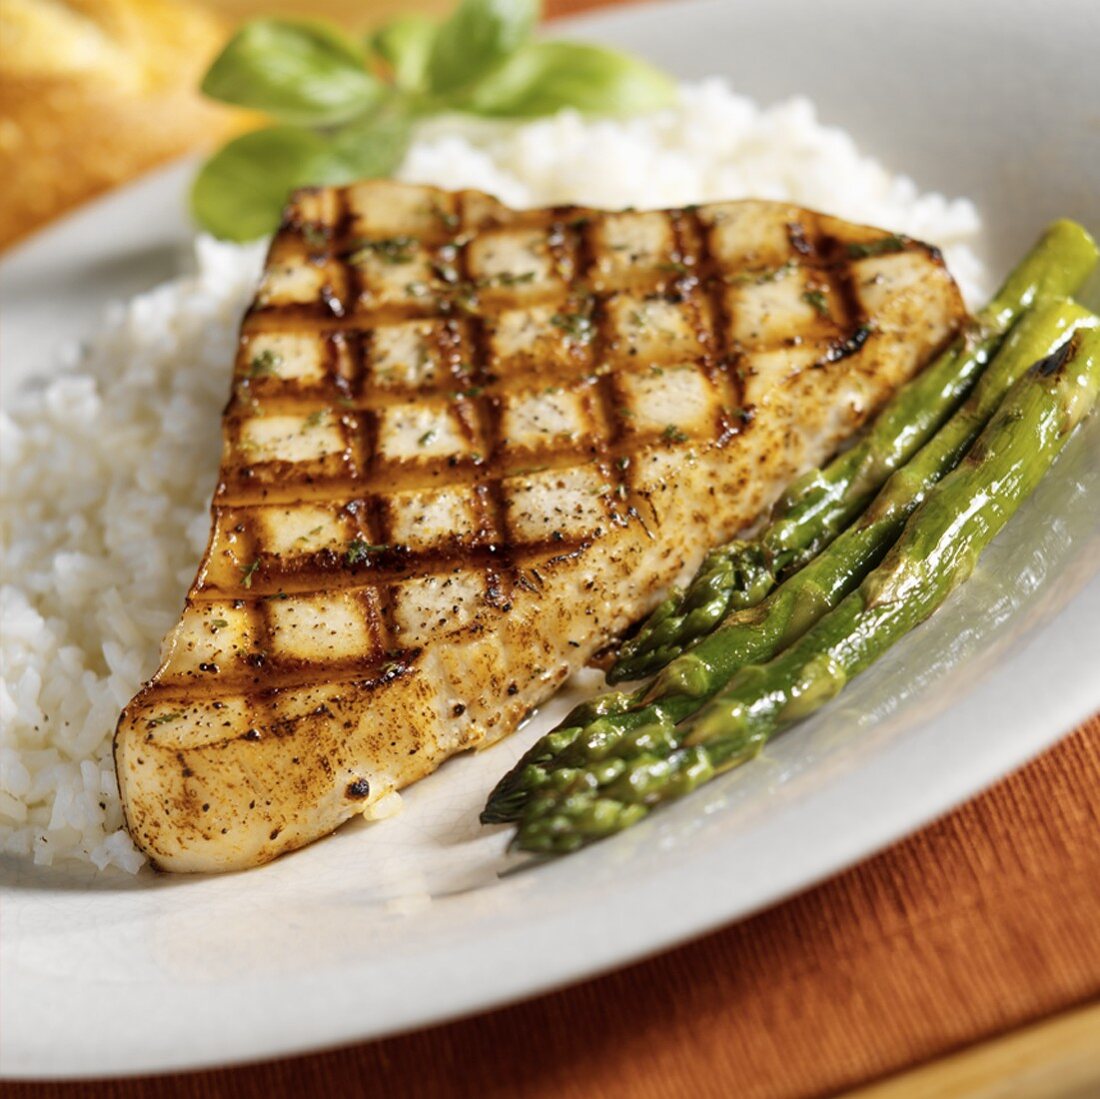 Grilled Swordfish Steak with White Rice and Asparagus